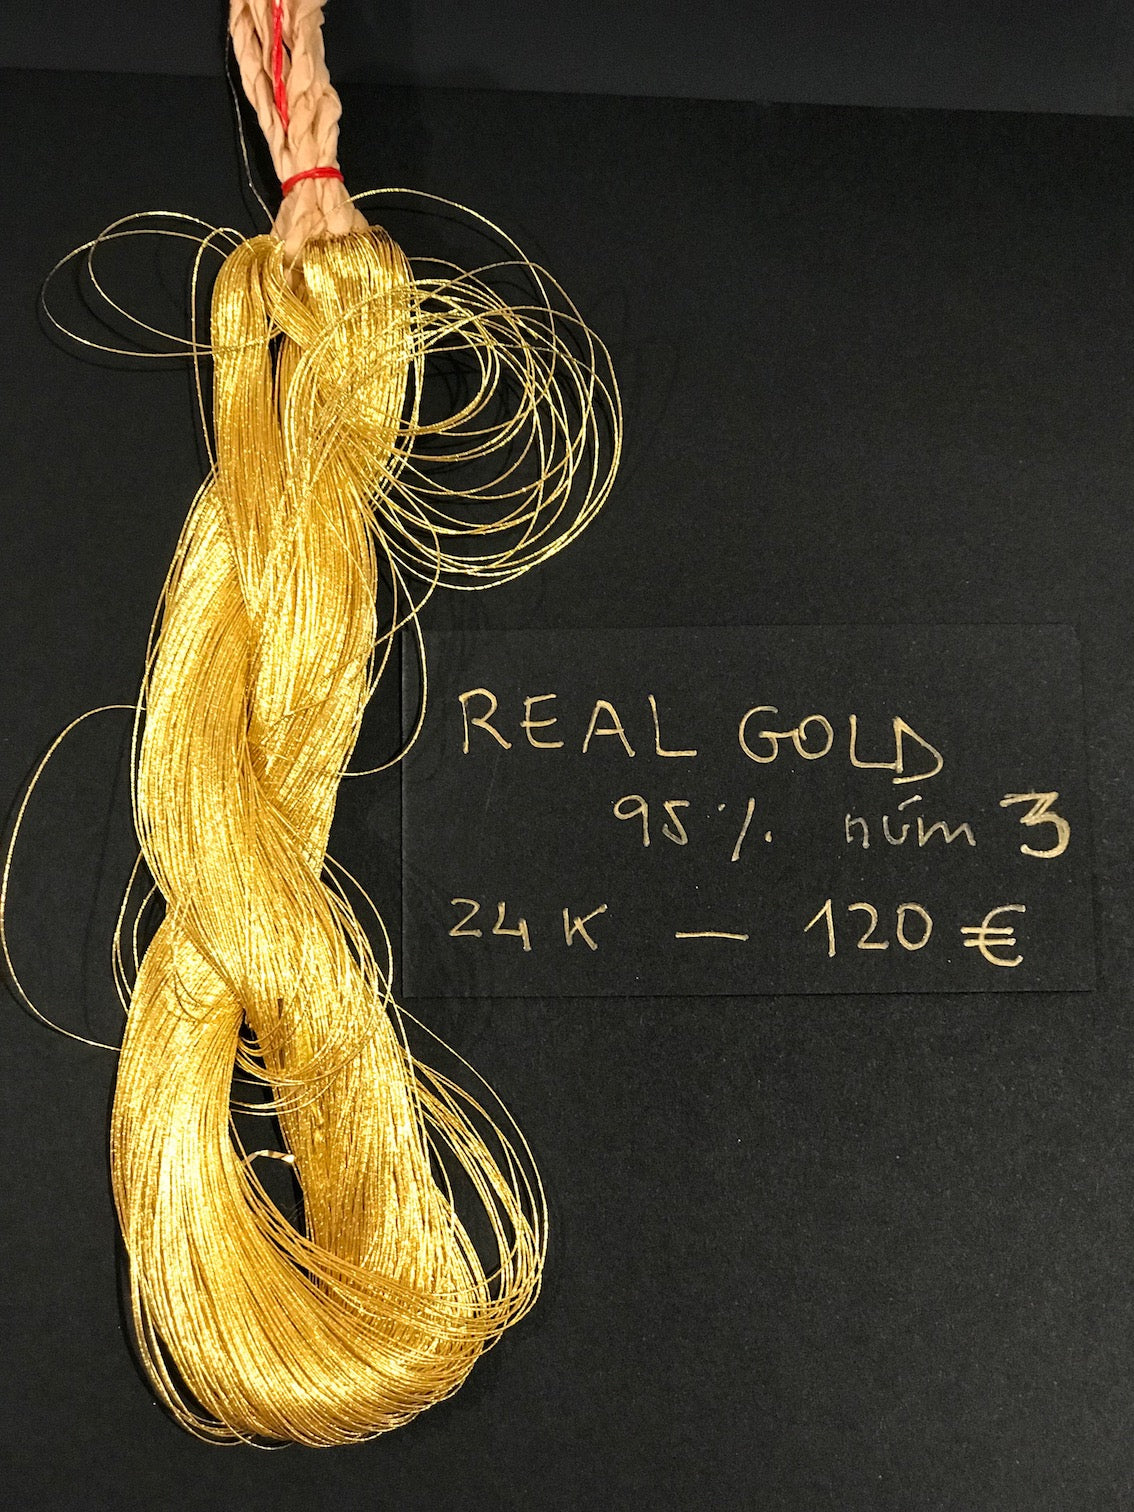 Hilo oro "real gold" 95 K nº 3